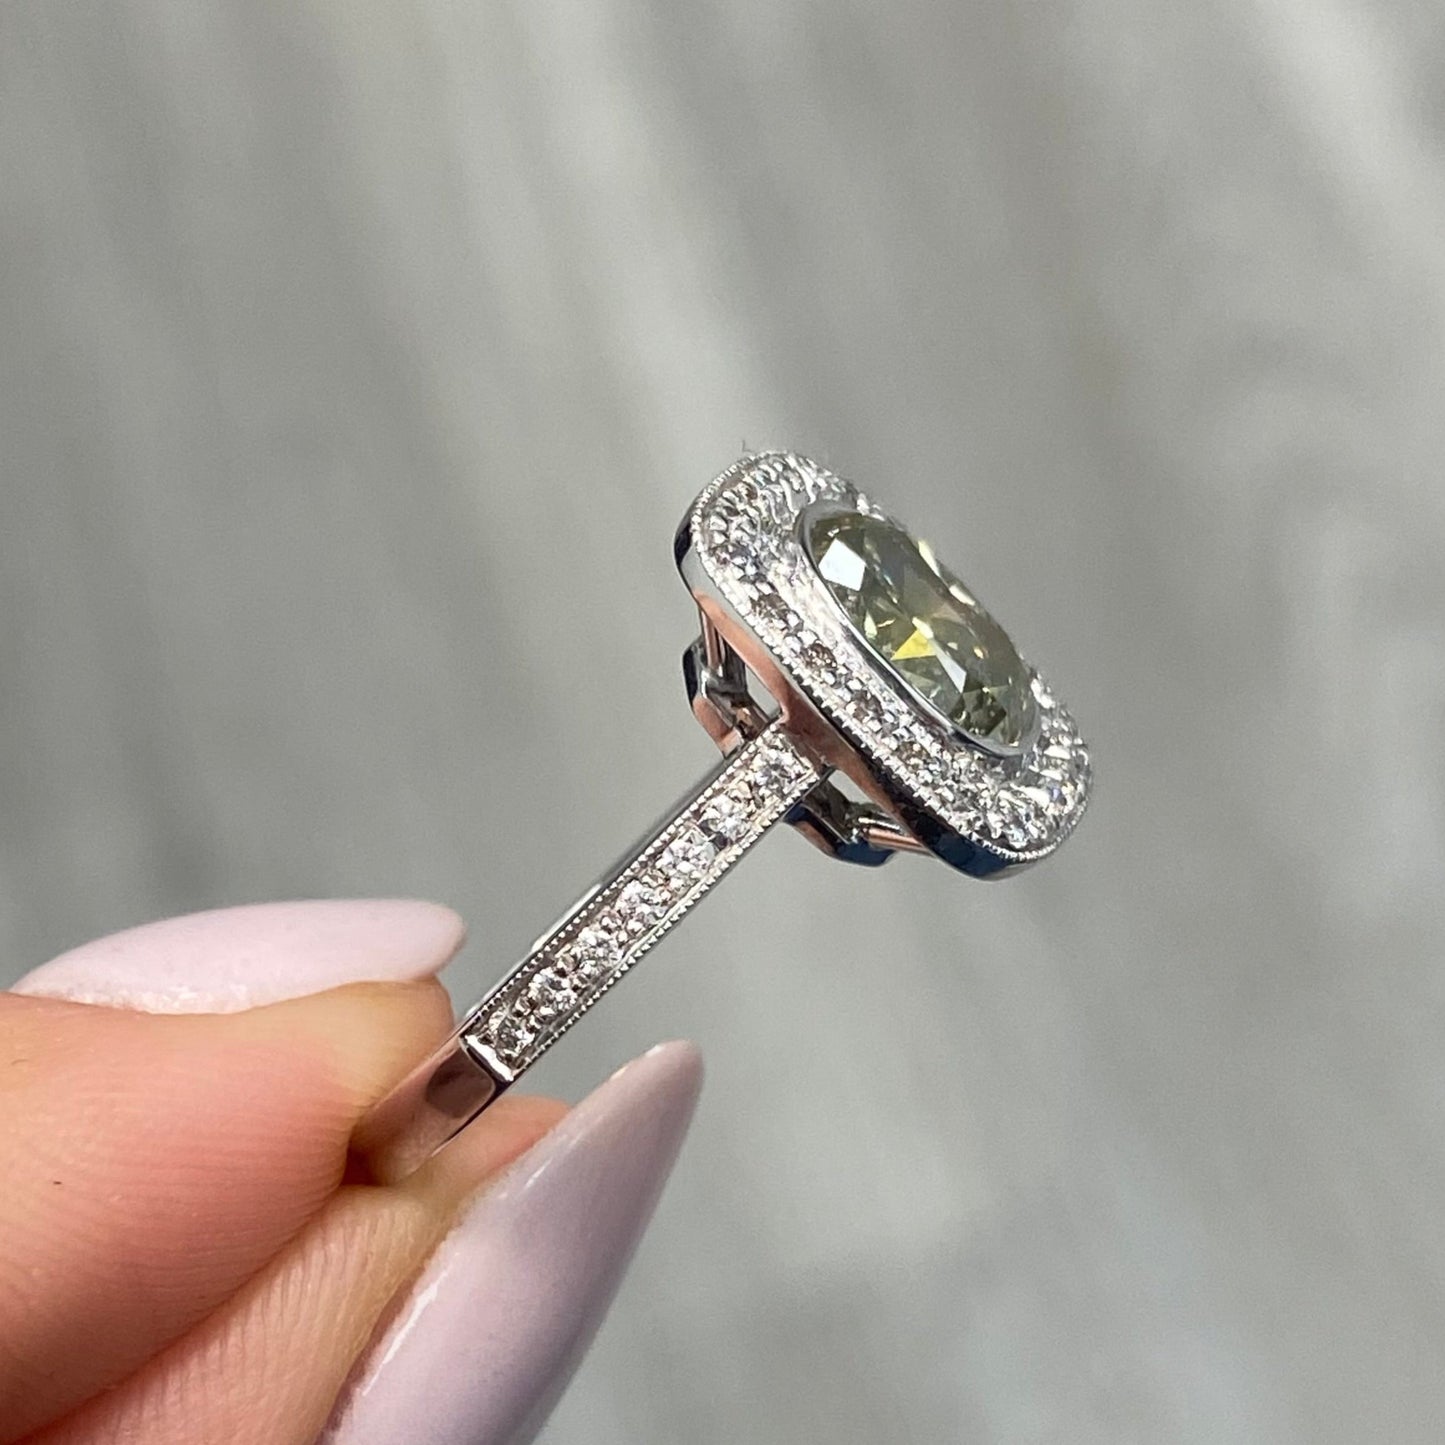 unique style green diamond ring surrounded by white diamonds handmade in white gold